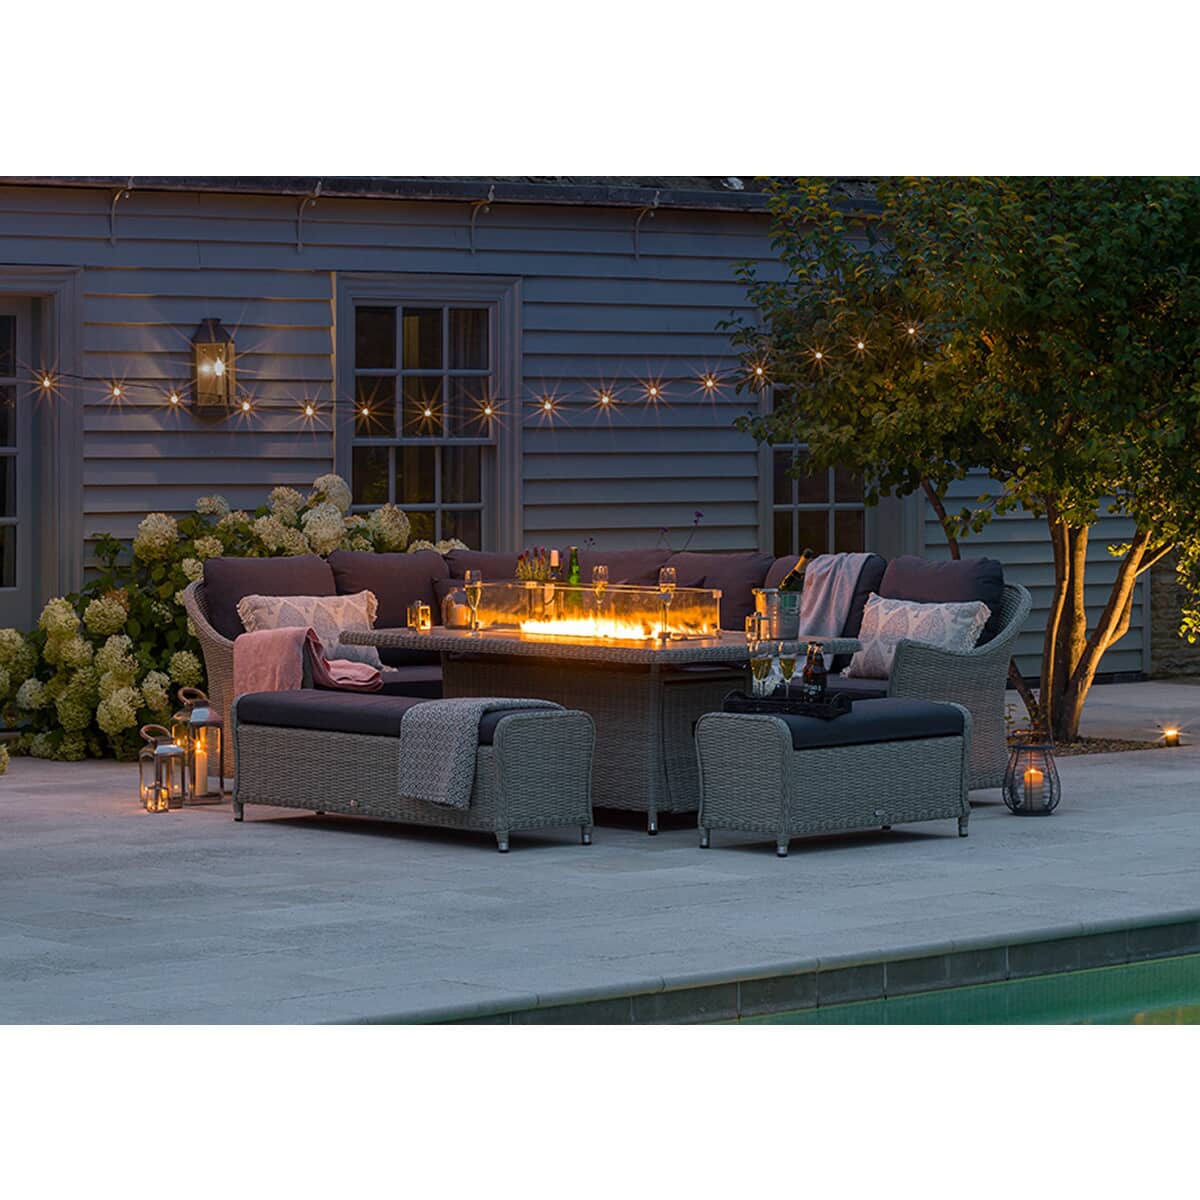 Bramblecrest Monterey Modular Sofa, Large Outdoor Dining Table With Fire Pit